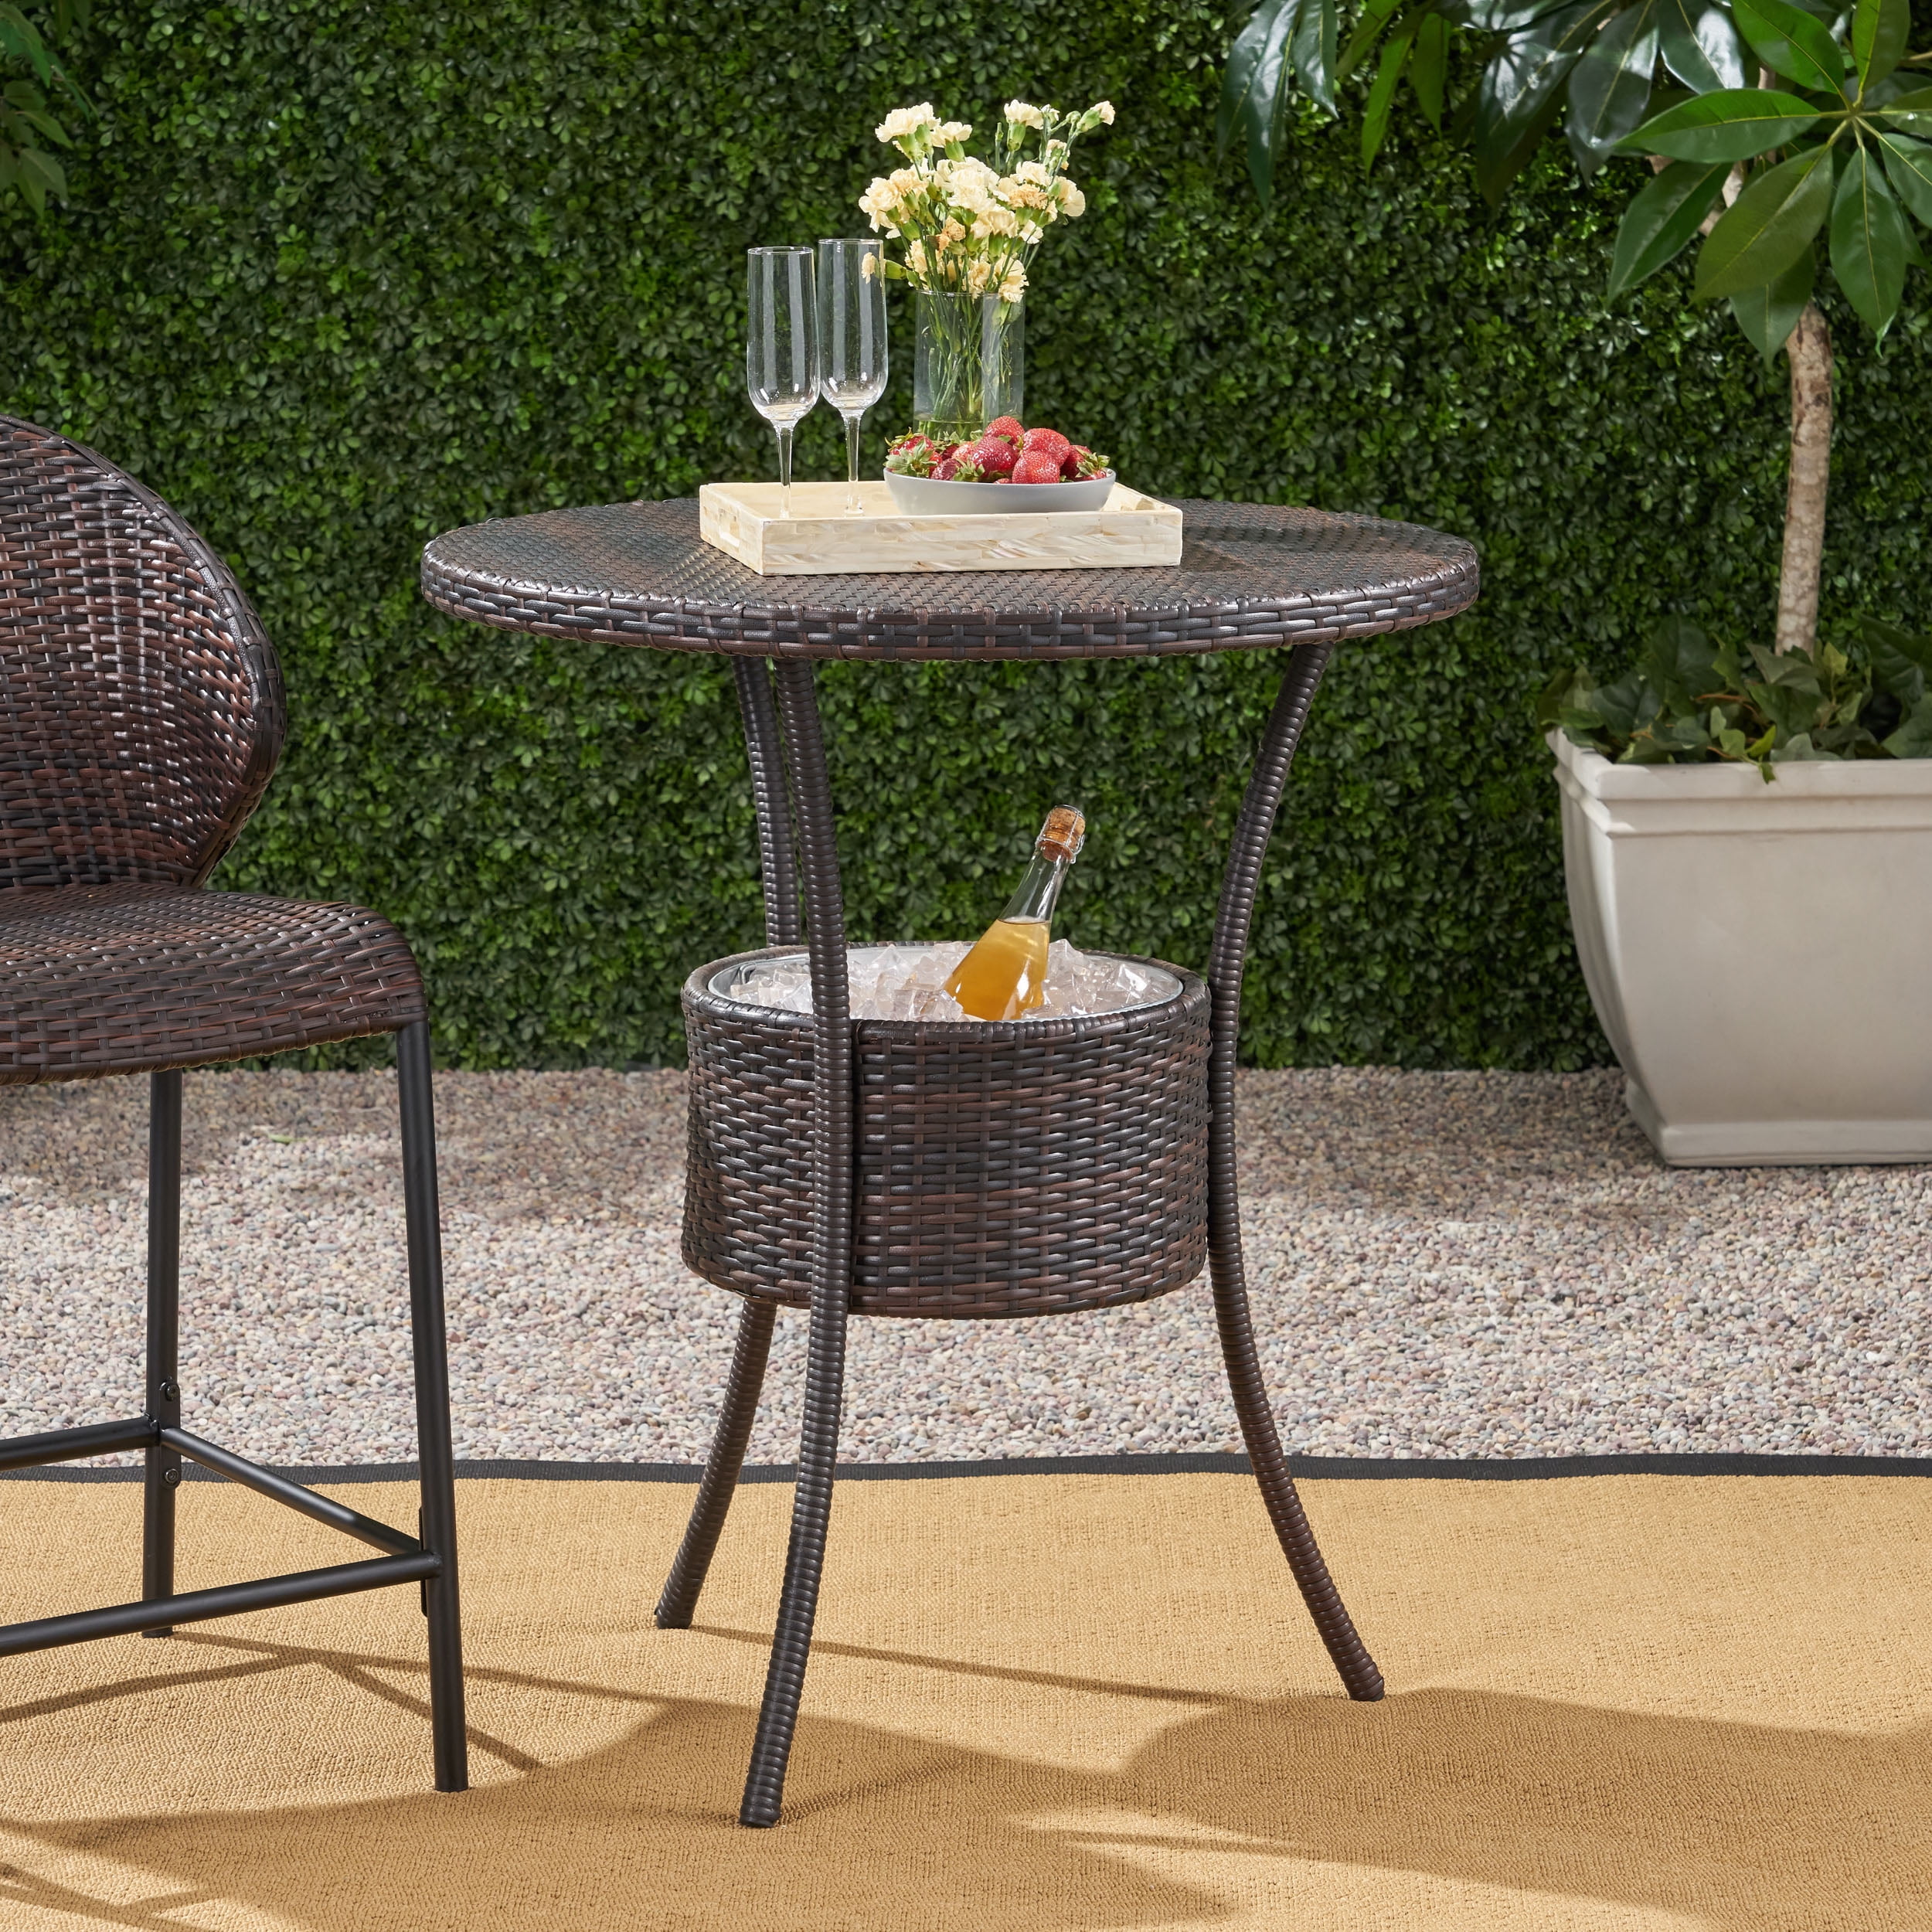 Outdoor Round Table Bar Patio Rattan Furniture Pub Dining Set Drink Cooler 